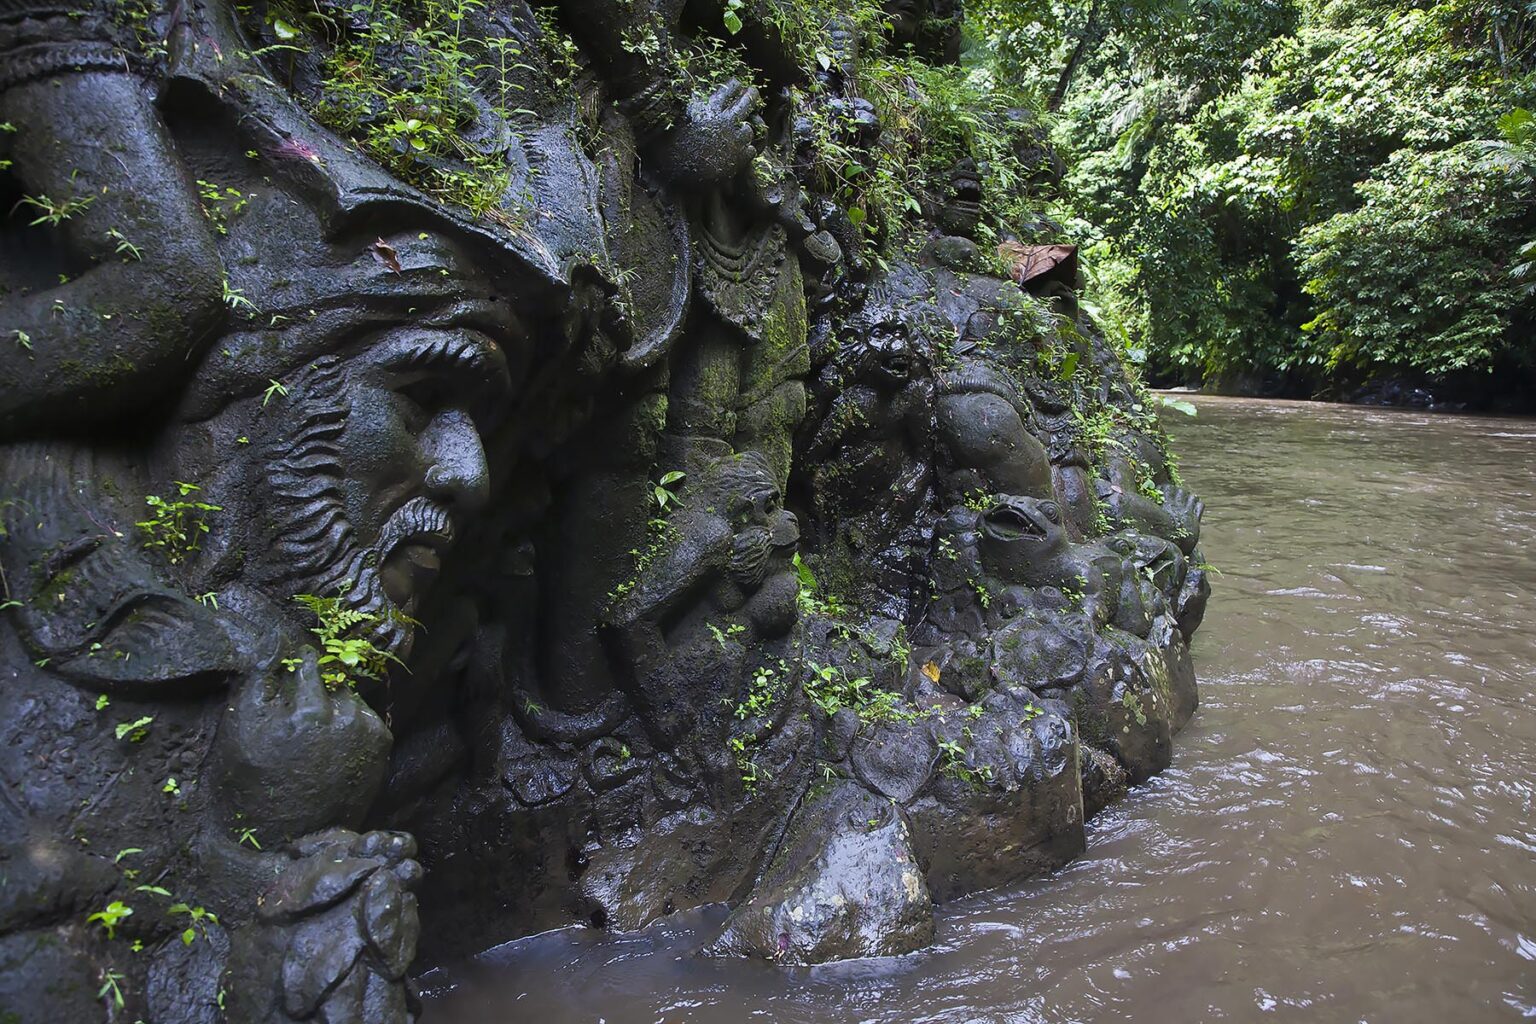 Artisans have carved the story of the RAMAYANA in stone along the banks of the AYUNG RIVER - UBUD, BALI, INDONESIA